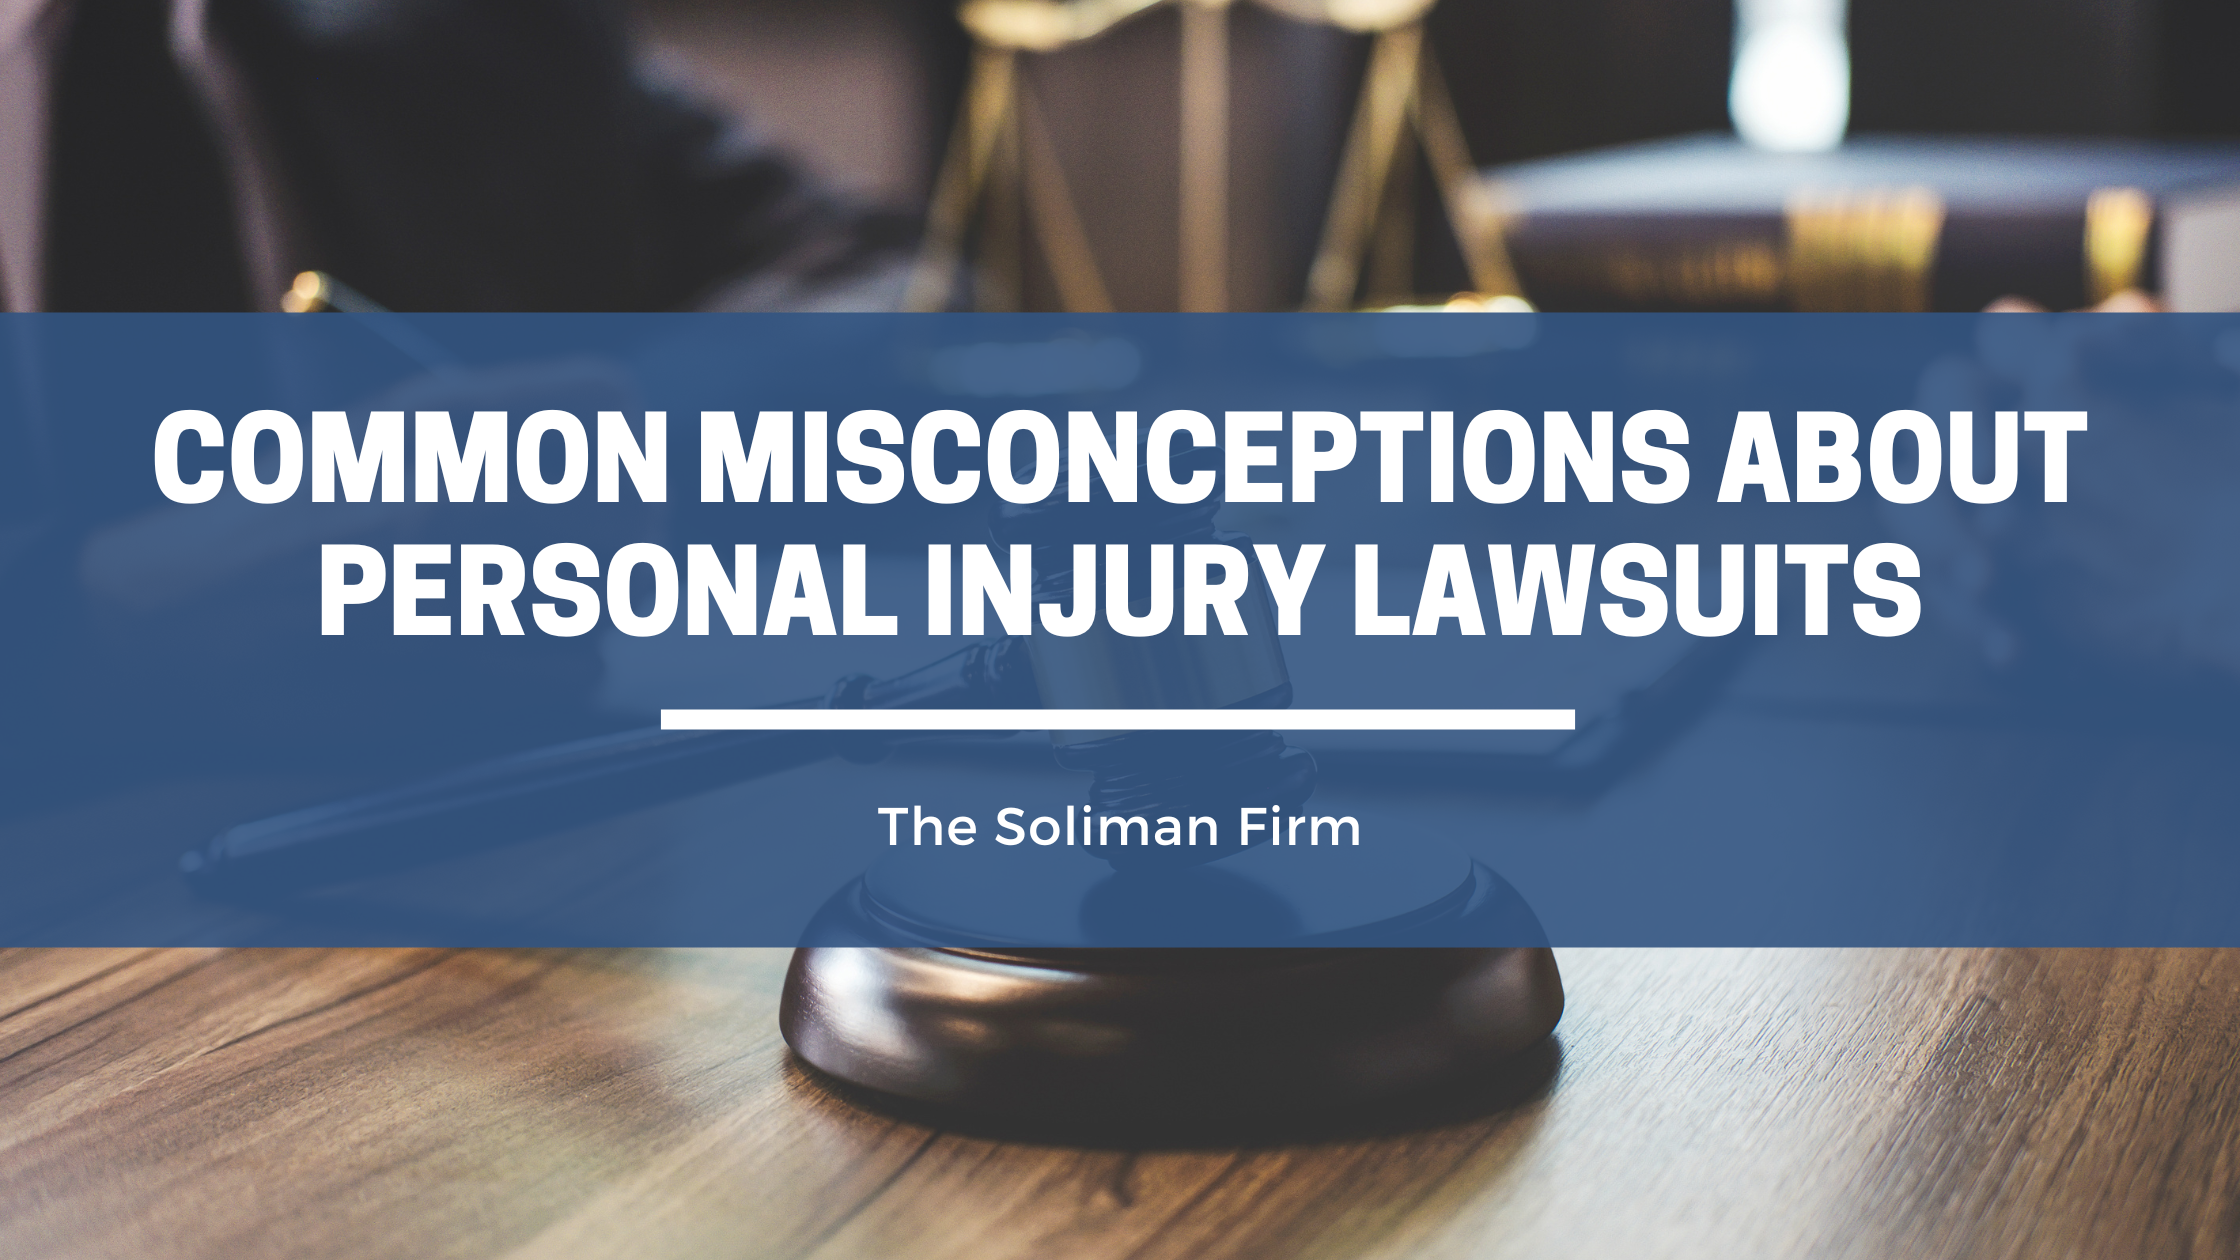 Common misconceptions about personal injury lawsuits